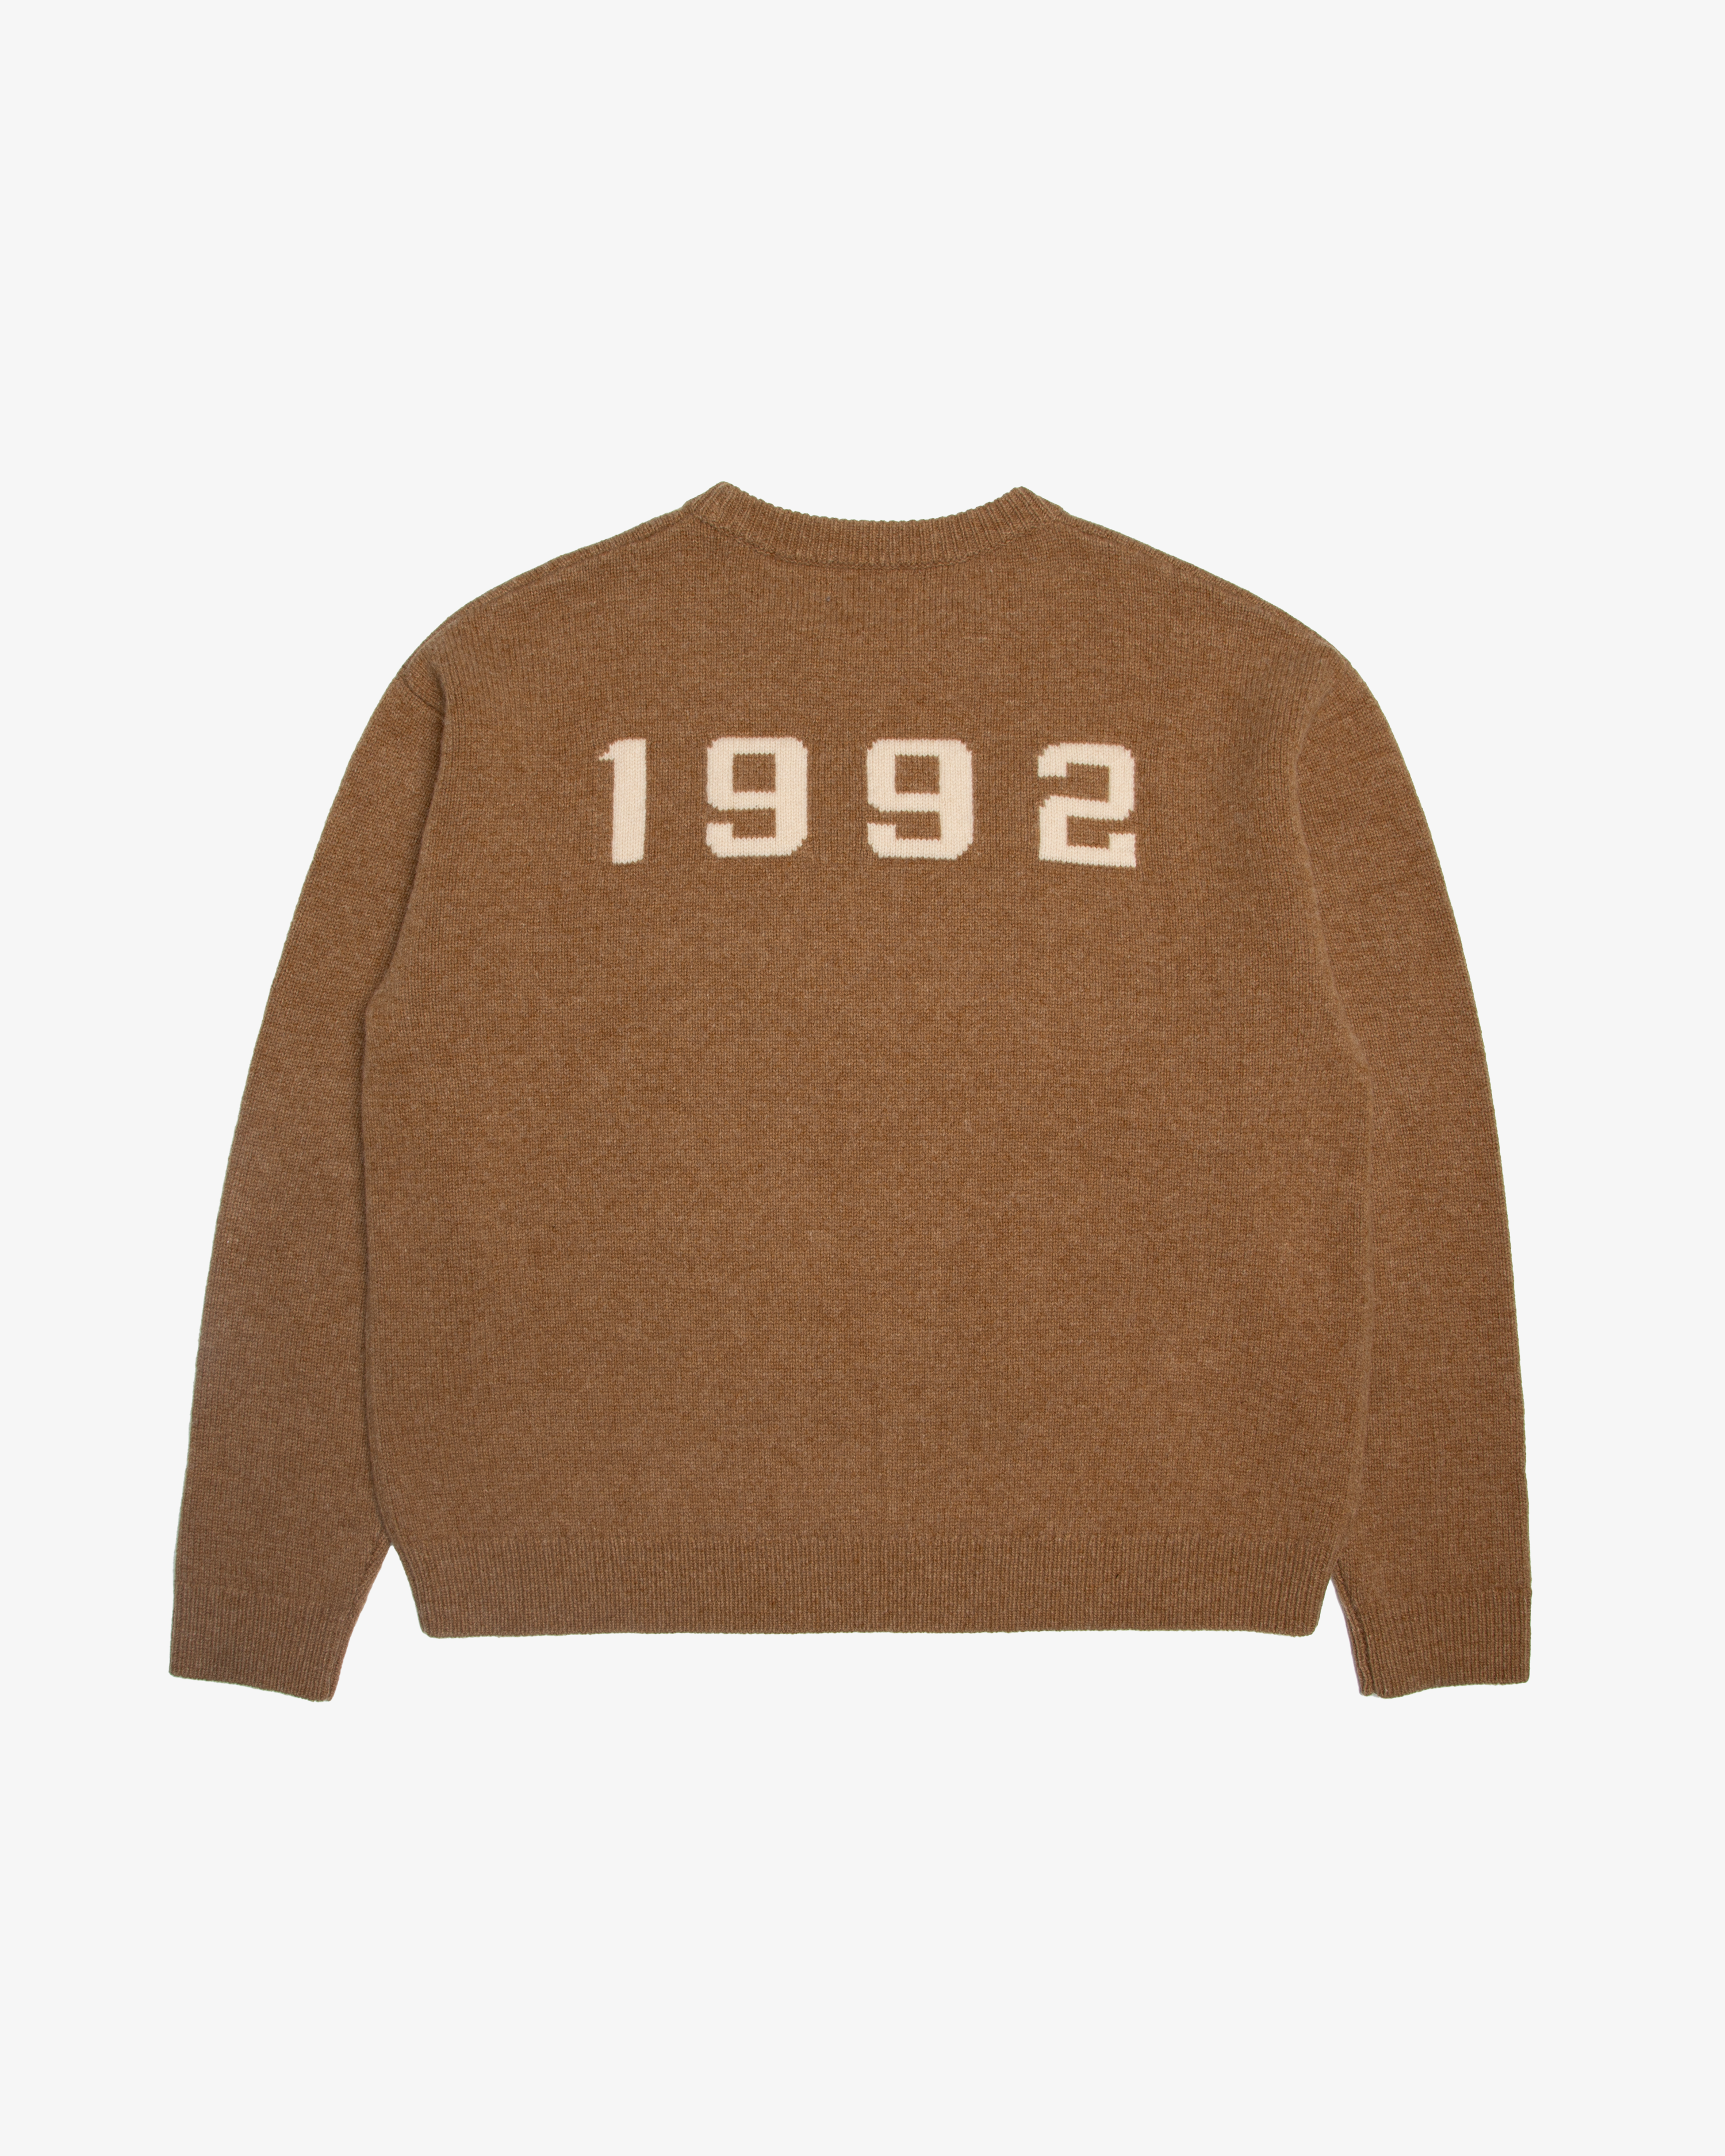 THE 1992 WOOL KNIT